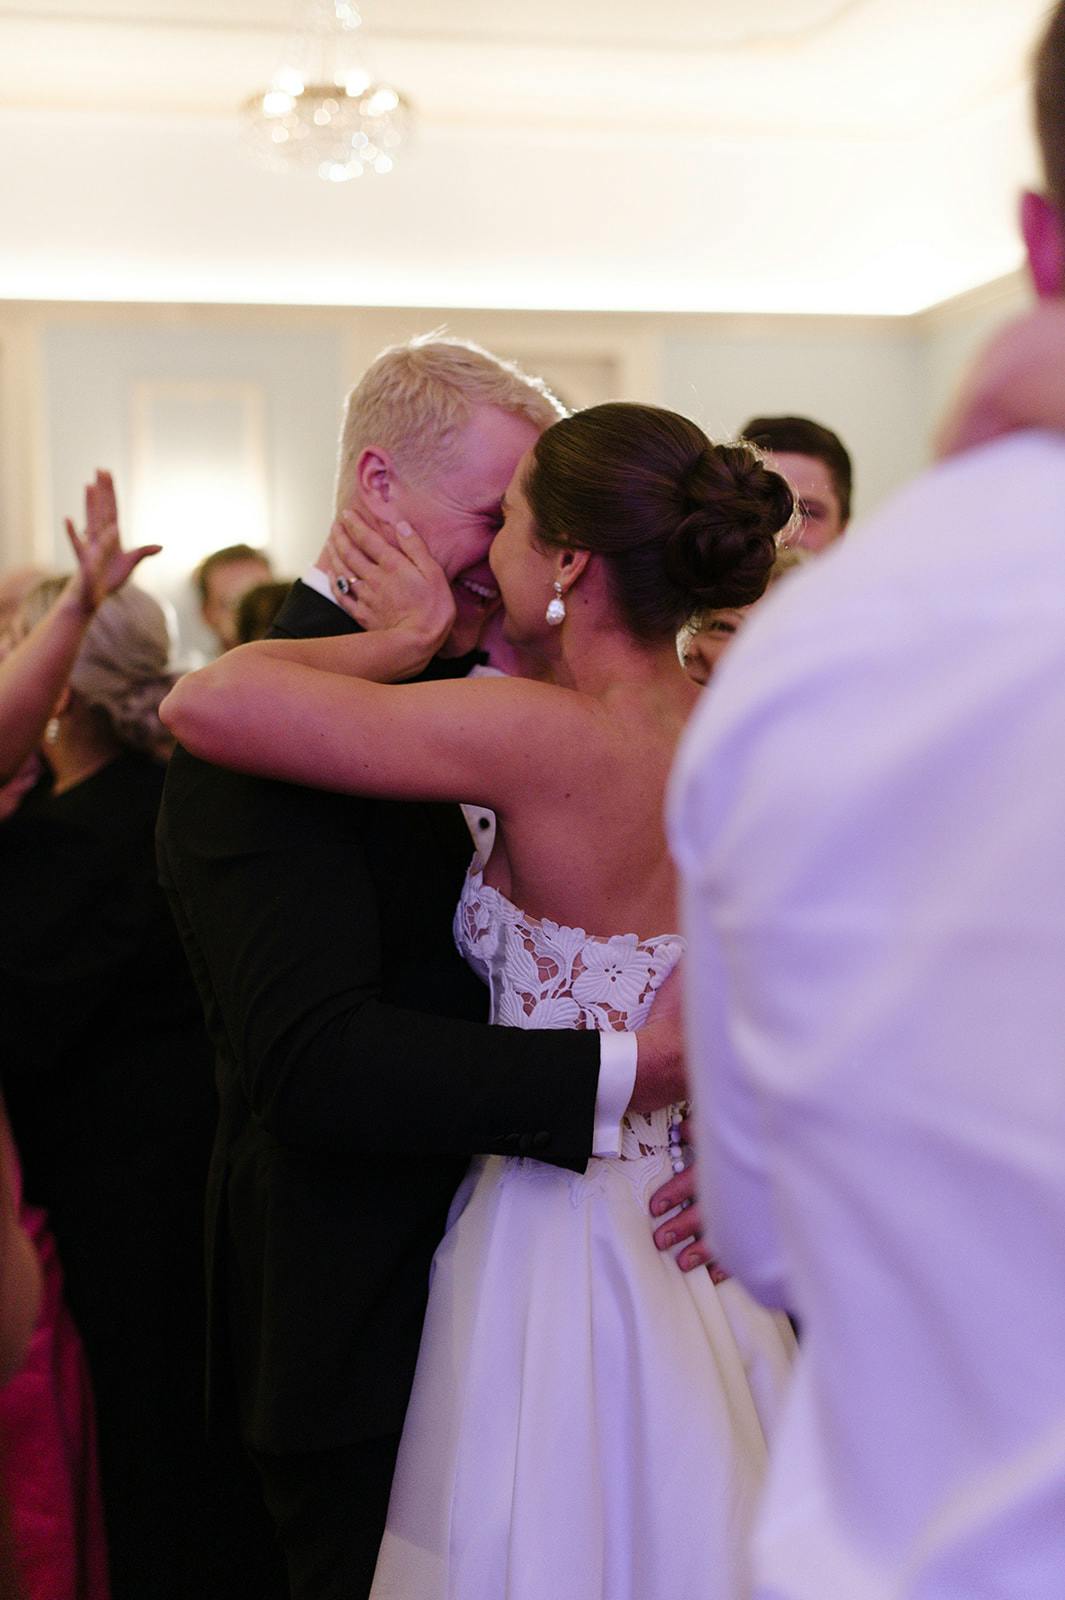 A newlywed couple shares a joyful embrace during their wedding reception. The bride, dressed in a white gown with lace details, has her arms wrapped around the groom, who is in a dark suit. They are surrounded by cheering guests, capturing a moment of celebration and love.